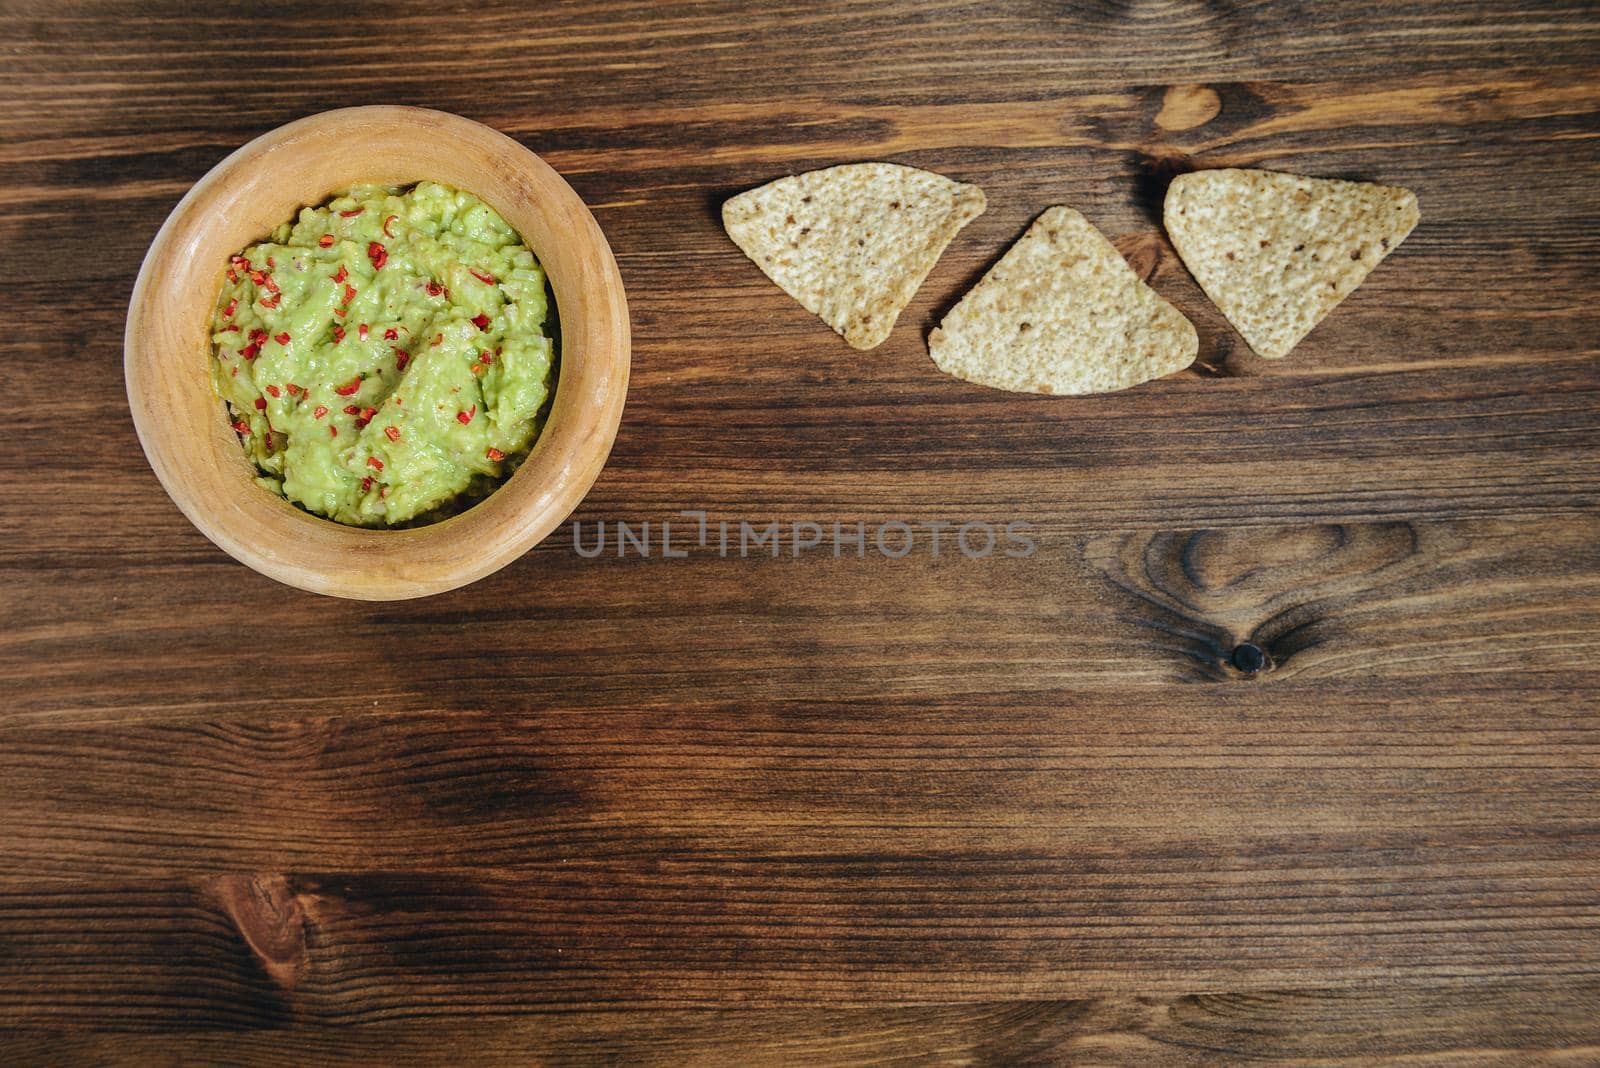 homemade guacamole with nachos in a wood bowl on a wooden table, typical mexican healthy vegan cuisine, top view and copy space for text